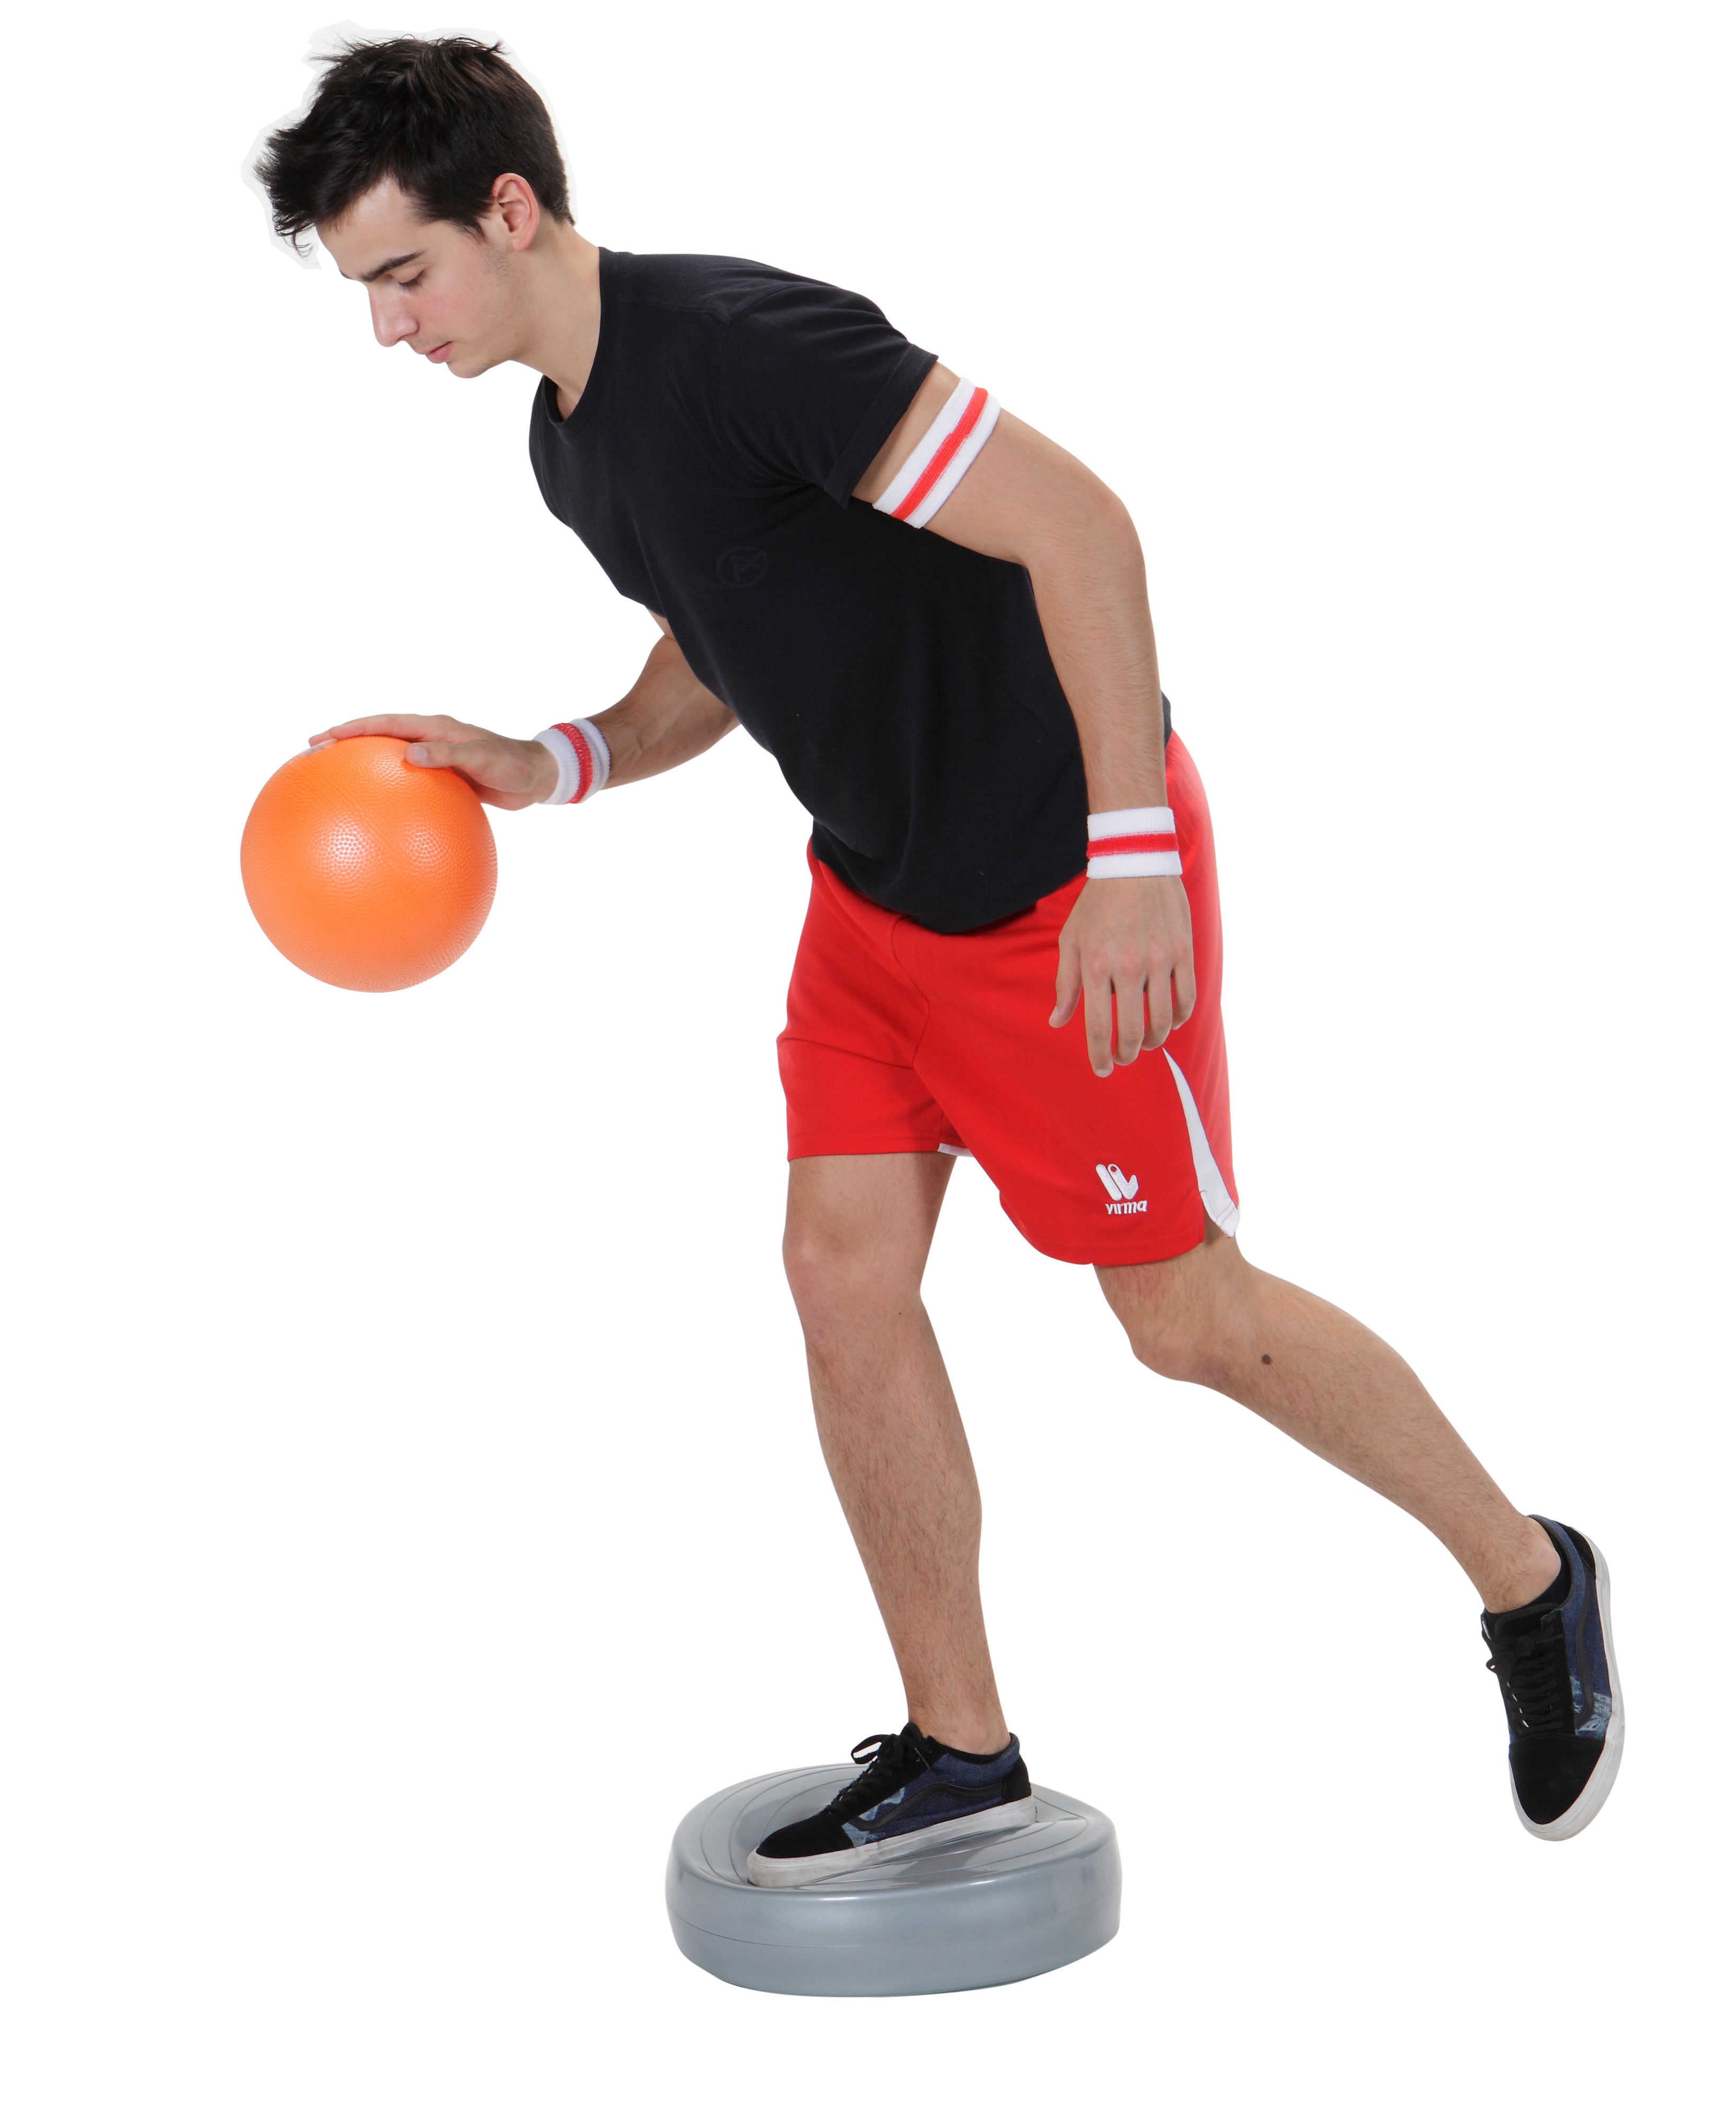 This proprioception board is a valid tool for training and rehabilitation as it allows different kinds of exercises to improve balance, muscle tone and posture. The Stability Wheel can be used in different training programs as basket, tennis and volleyball. It is also suitable for ski gymnastics. Inflate the product to the needed stability level.